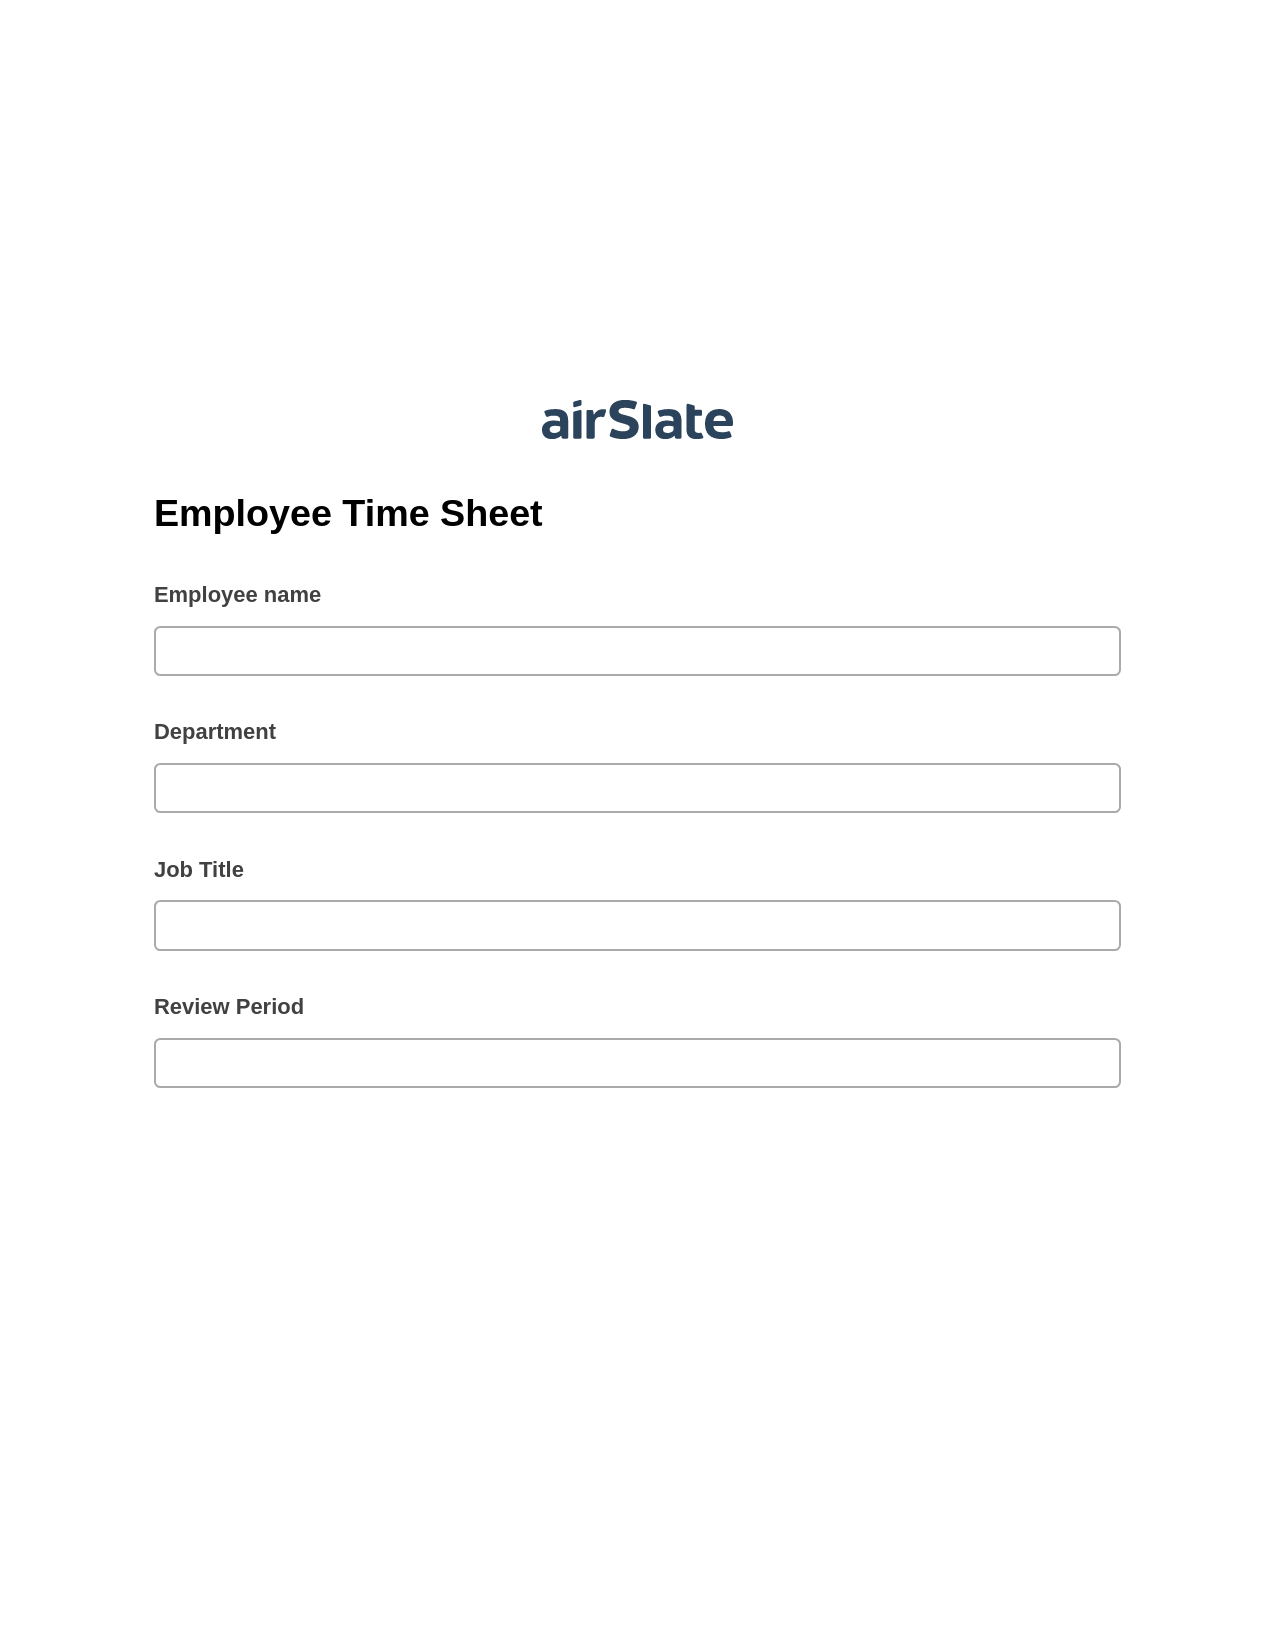 Multirole Employee Time Sheet Pre-fill from AirTable Bot, Slack Notification Bot, Export to Excel 365 Bot